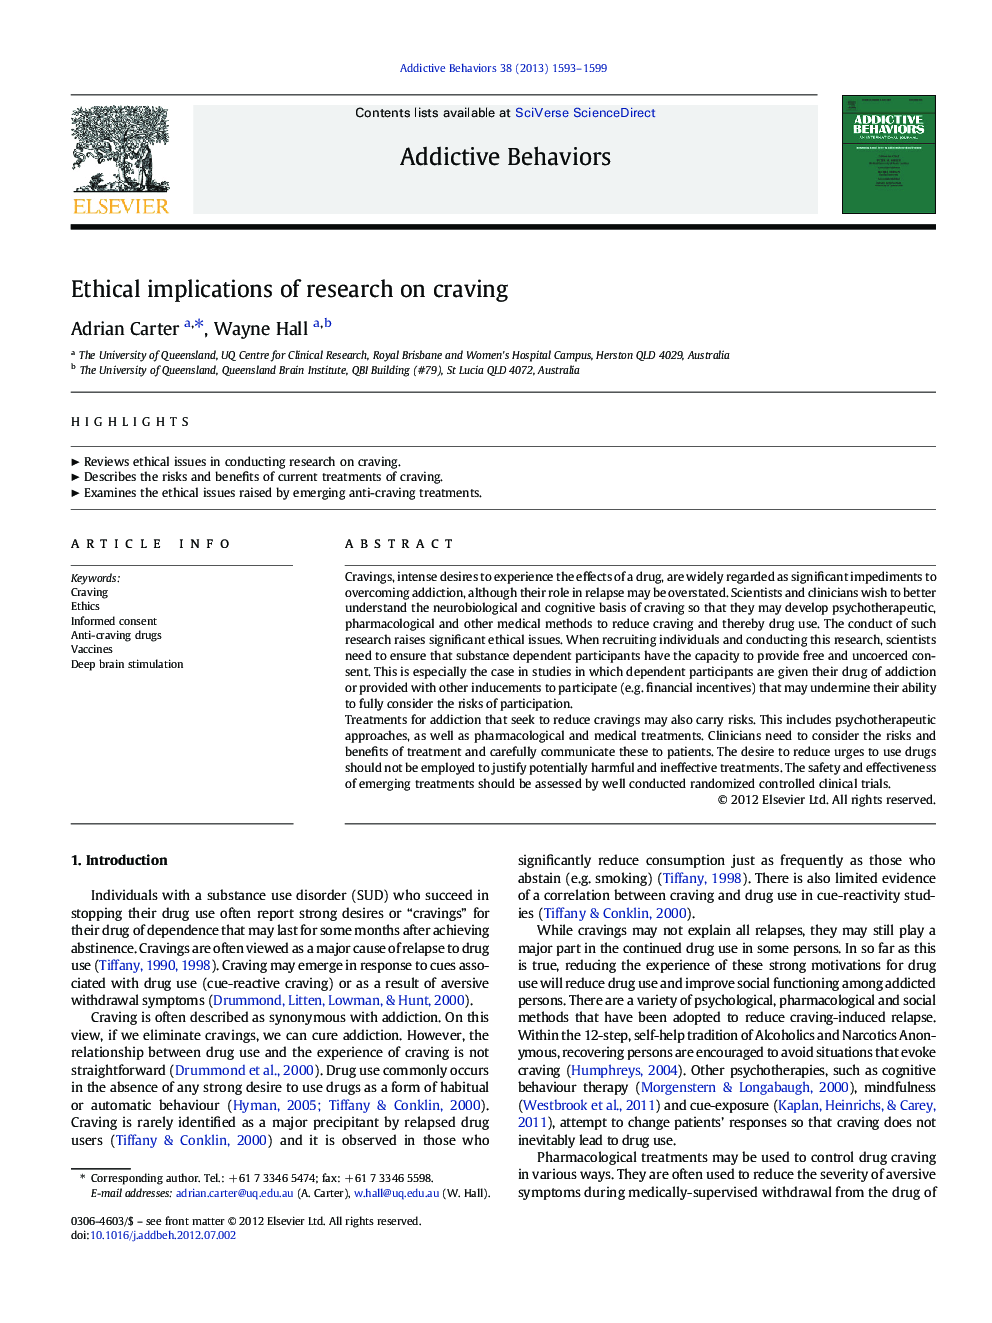 Ethical implications of research on craving